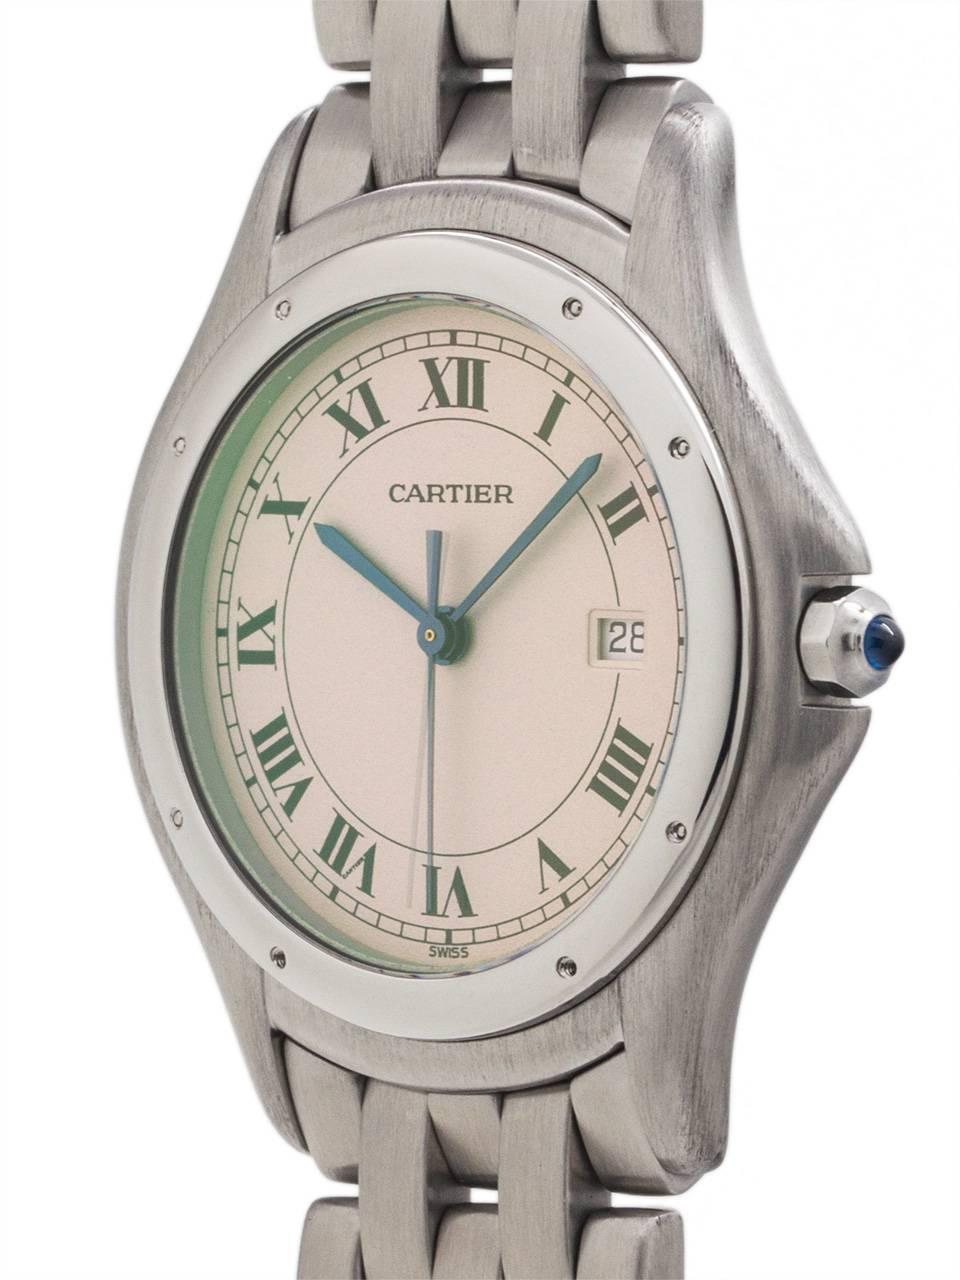 Cartier man’s Cougar model stainless steel circa 1980’s. Featuring round 32 X 36mm case with rounded stepped bezel secured by screws, antique white dial with classic Cartier Roman figures and blued steel hands. Powered by quartz movement with sweep